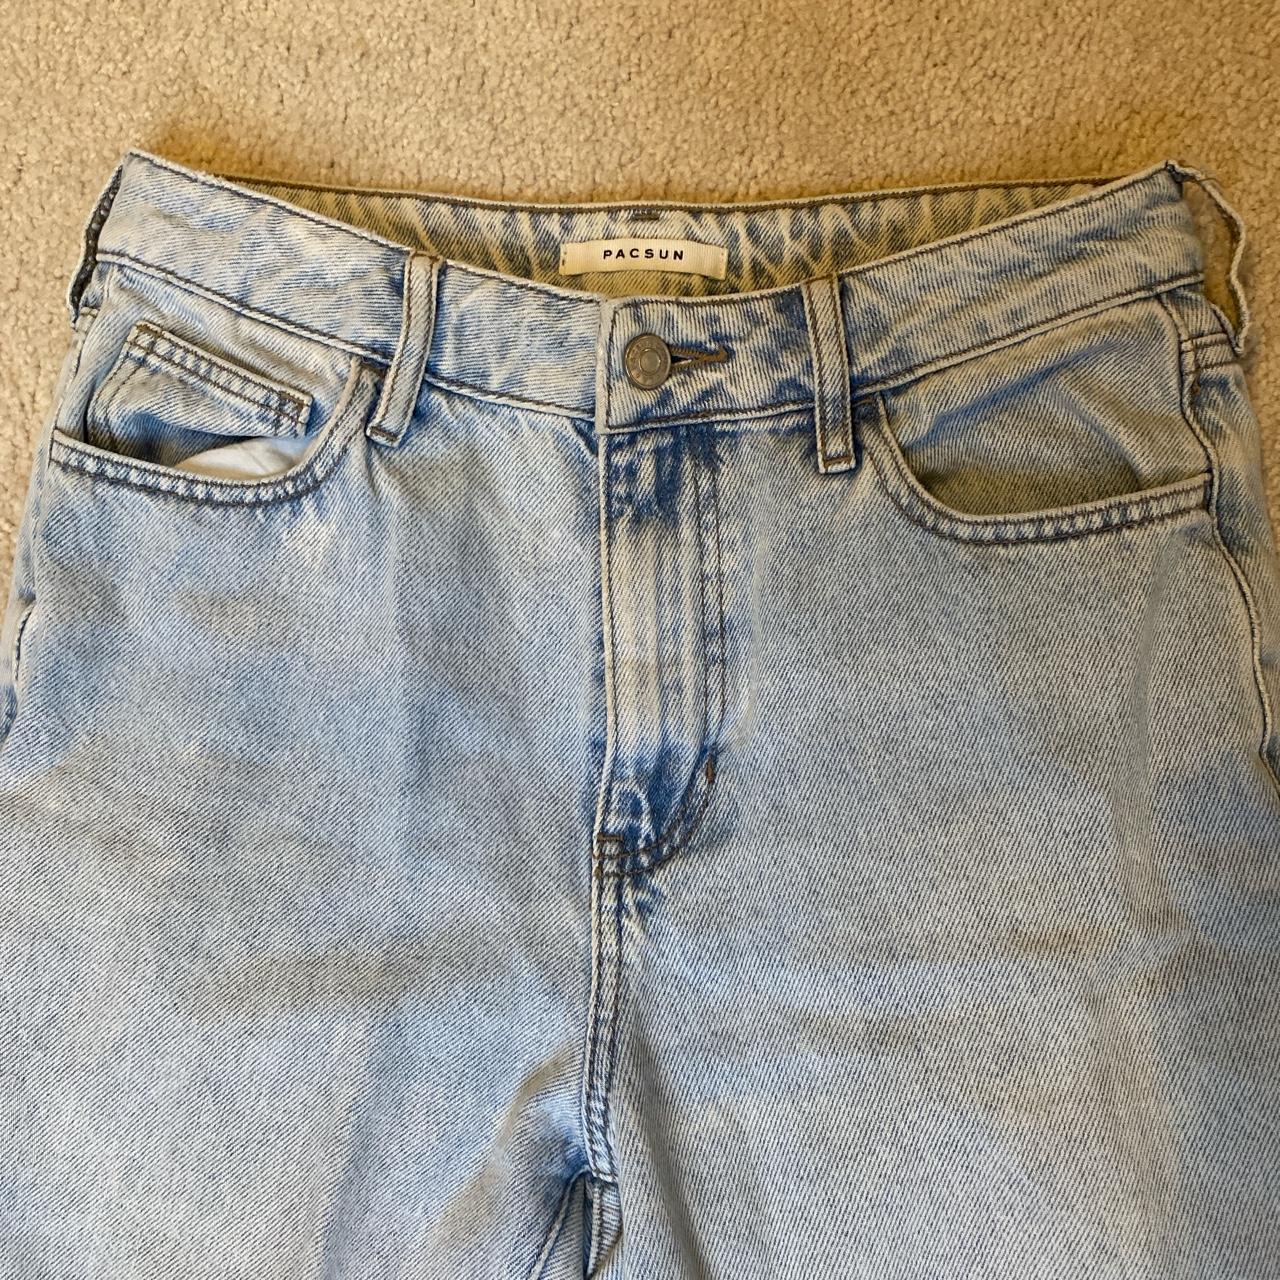 Pacsun mom jeans in a cute light wash! Size 27 - Depop